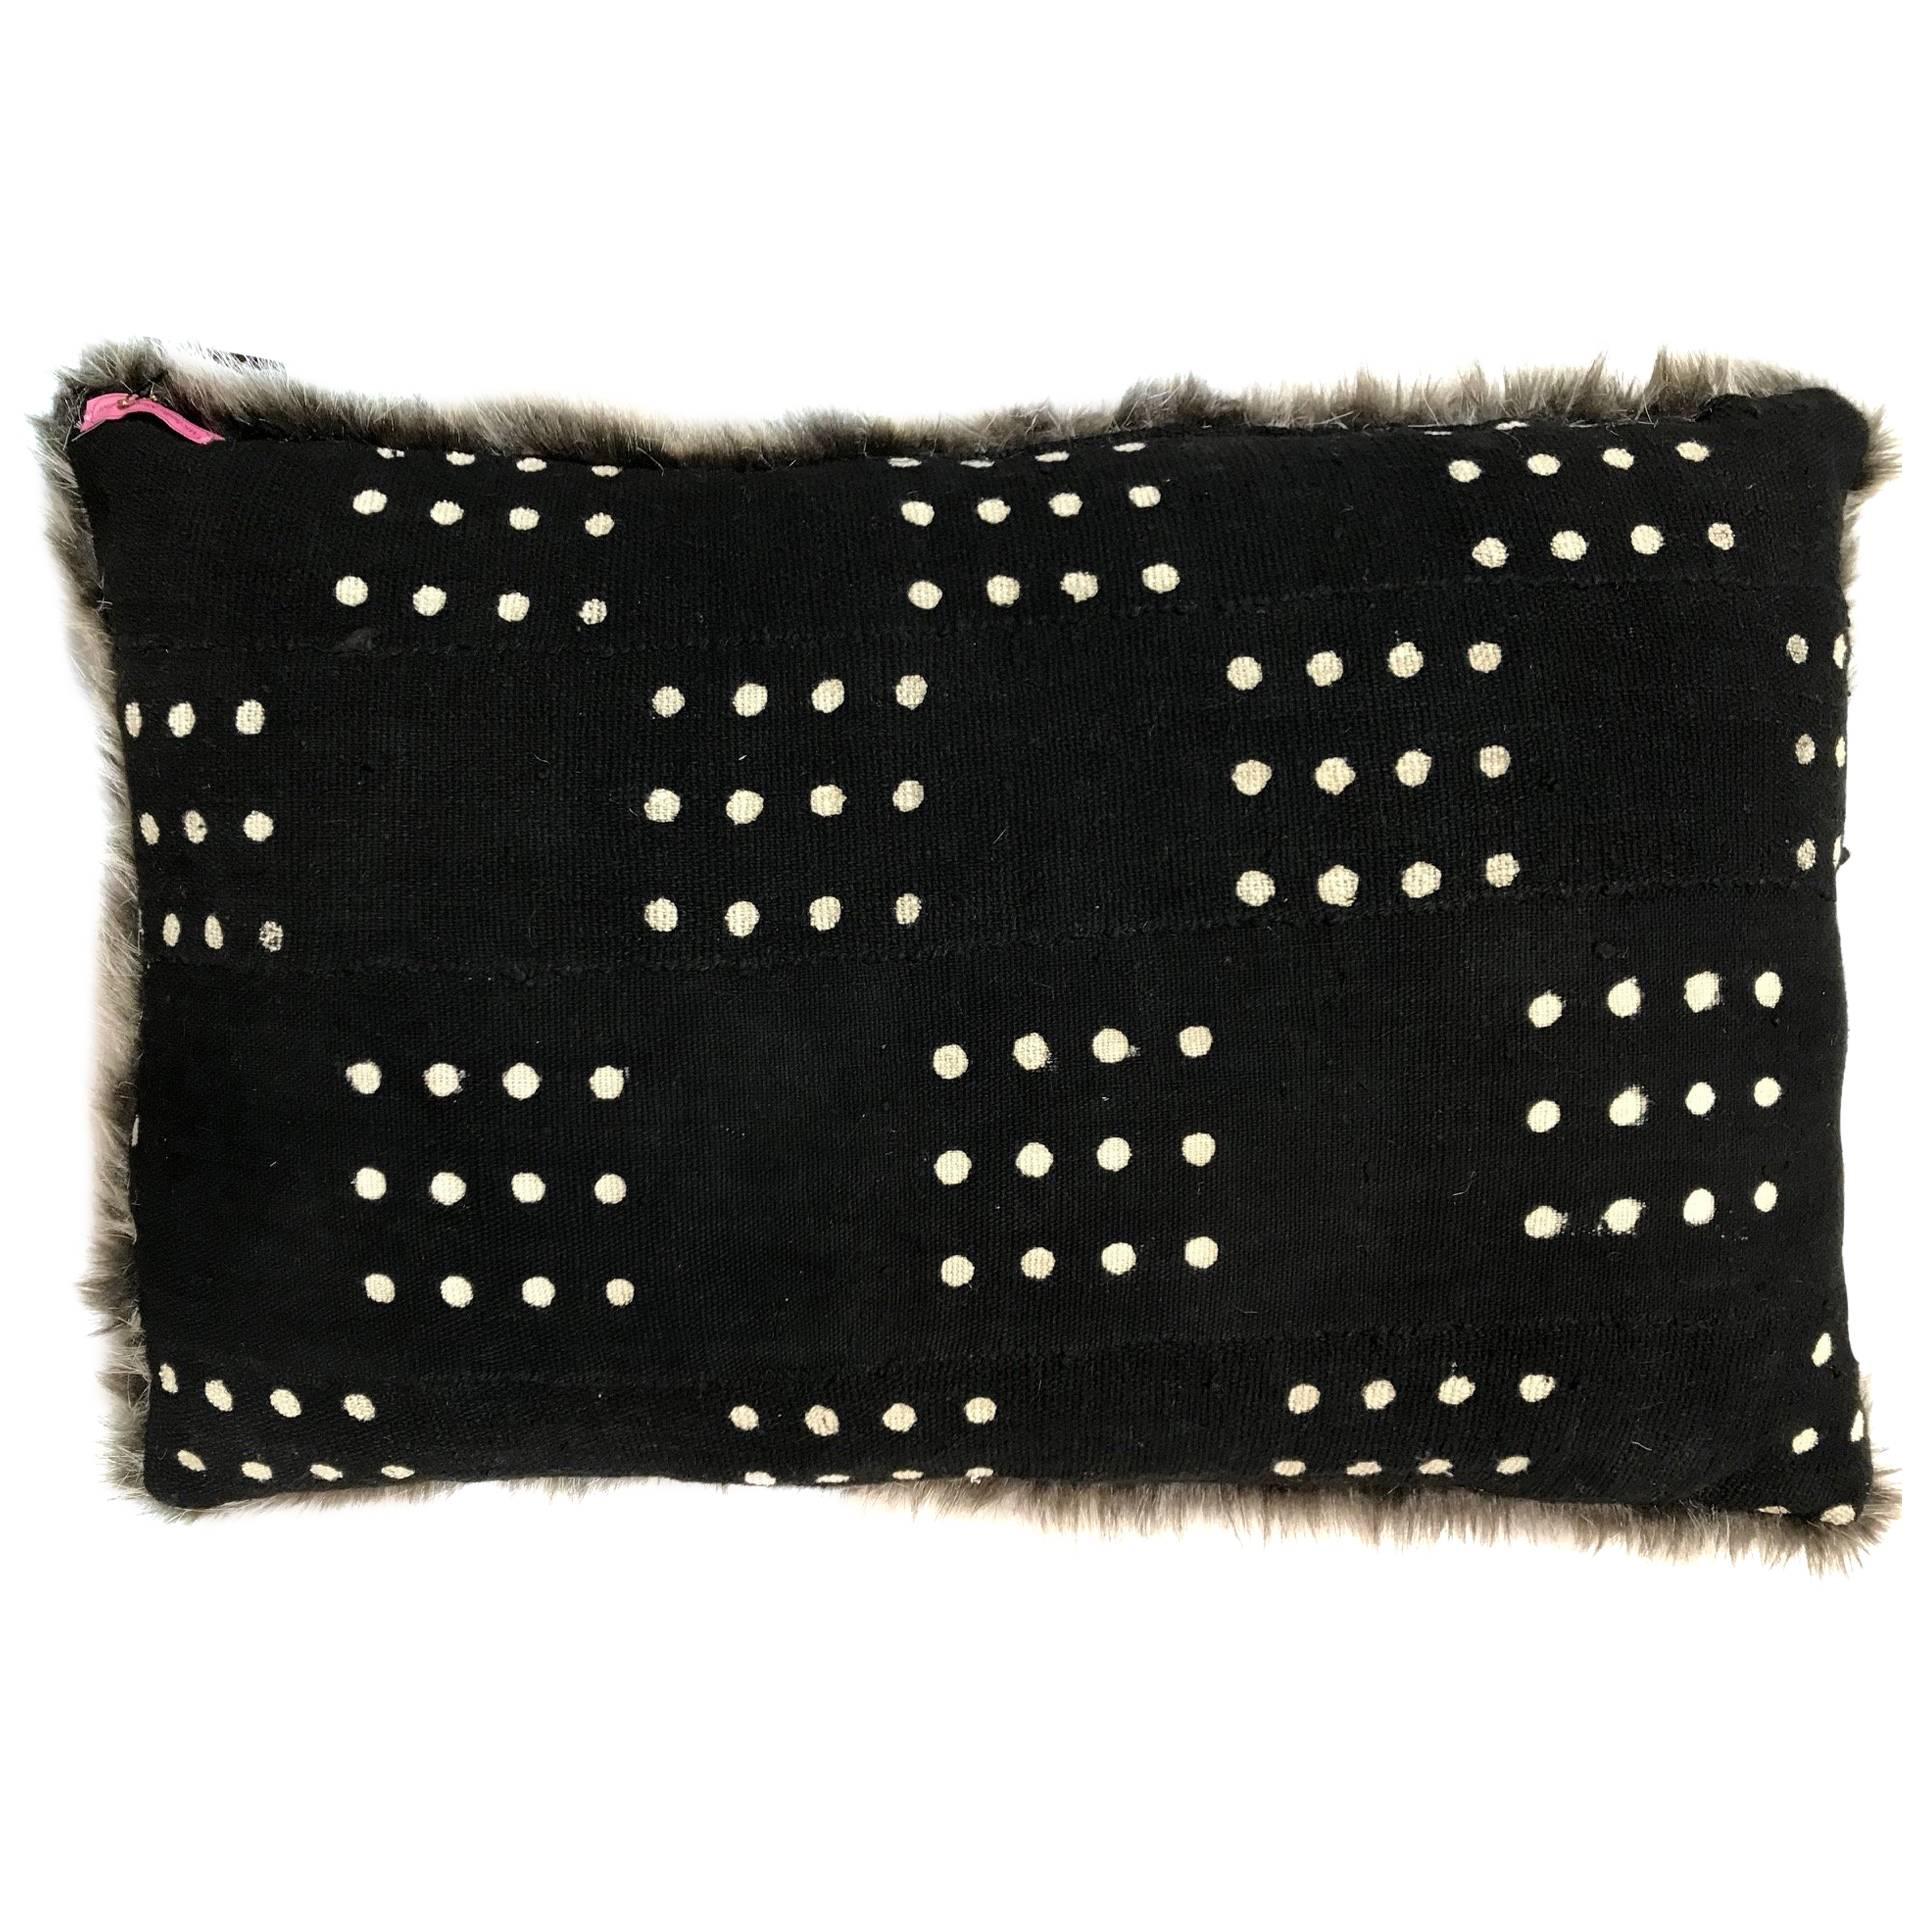 Michelle Nussbaumer Designed Italian Faux Fur Mudcloth Pillow (Squared Dots) For Sale